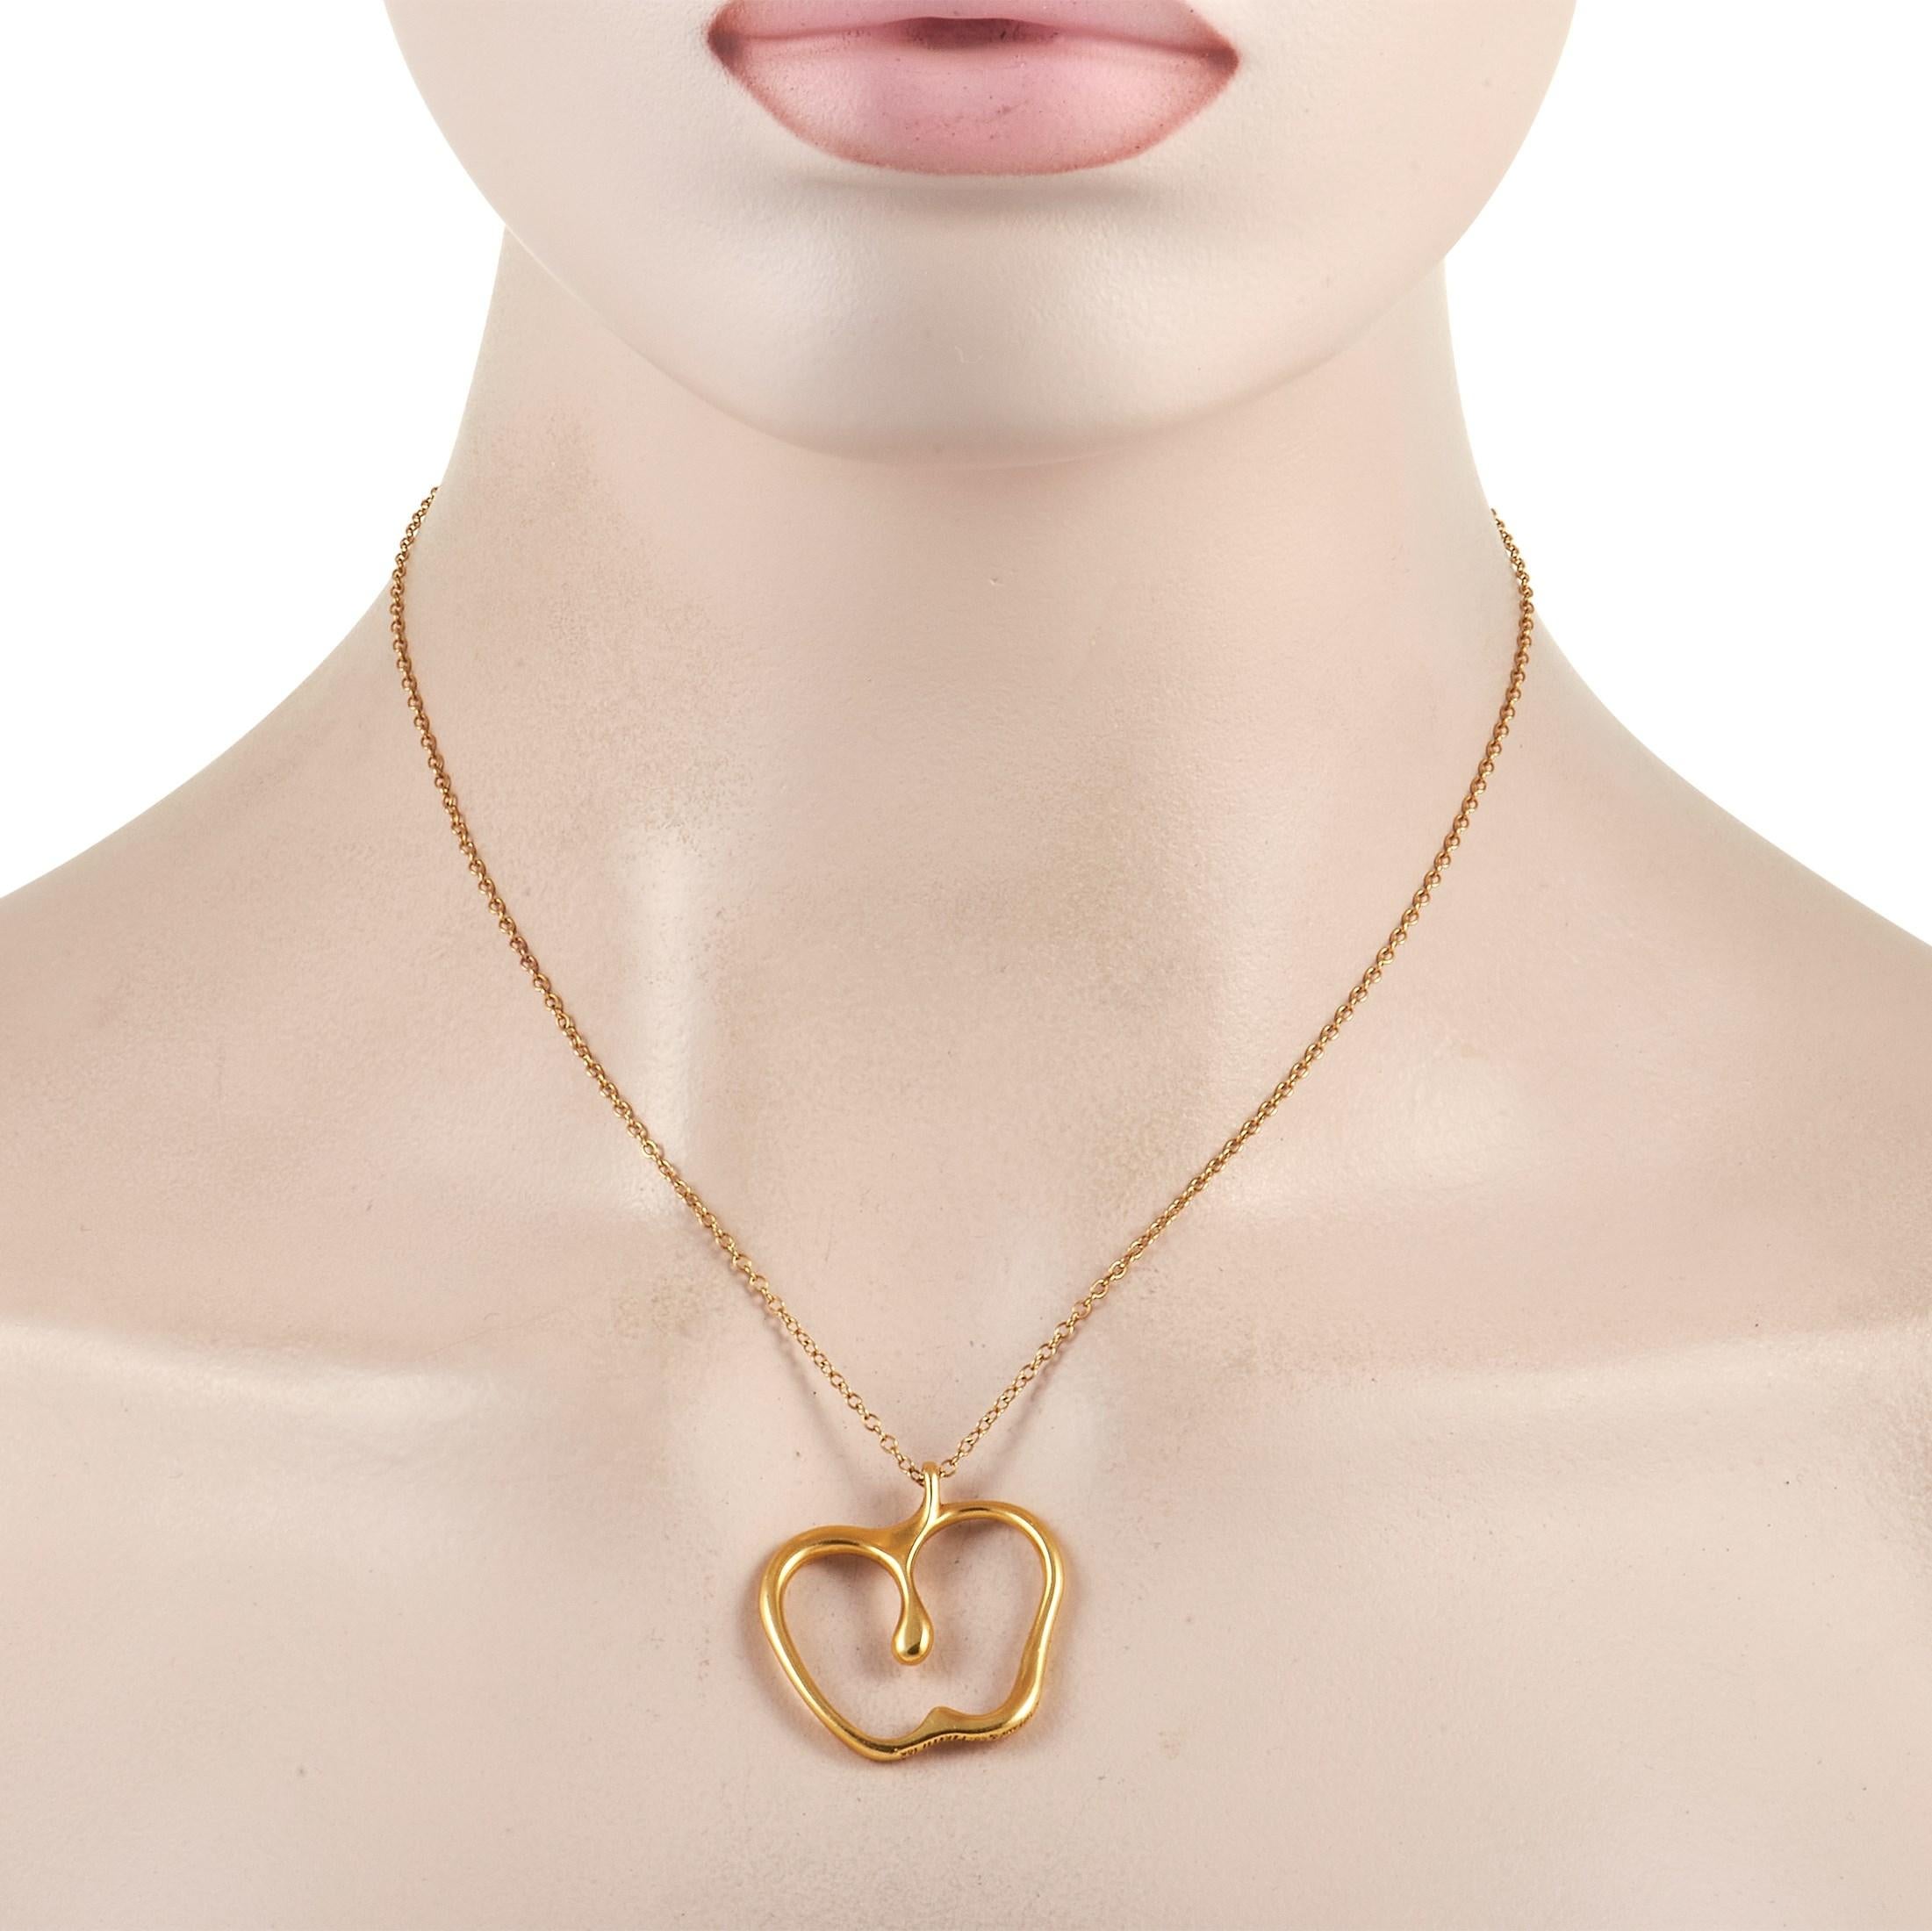 Not a fan of the usual heart pendant? Give the apple a try. Held by a 30-inch long 18K yellow gold cable chain is an apple cut-out pendant measuring 1.25-inch by 1.15-inch. The sophisticated simplicity and whimsical charm of this fine jewelry will